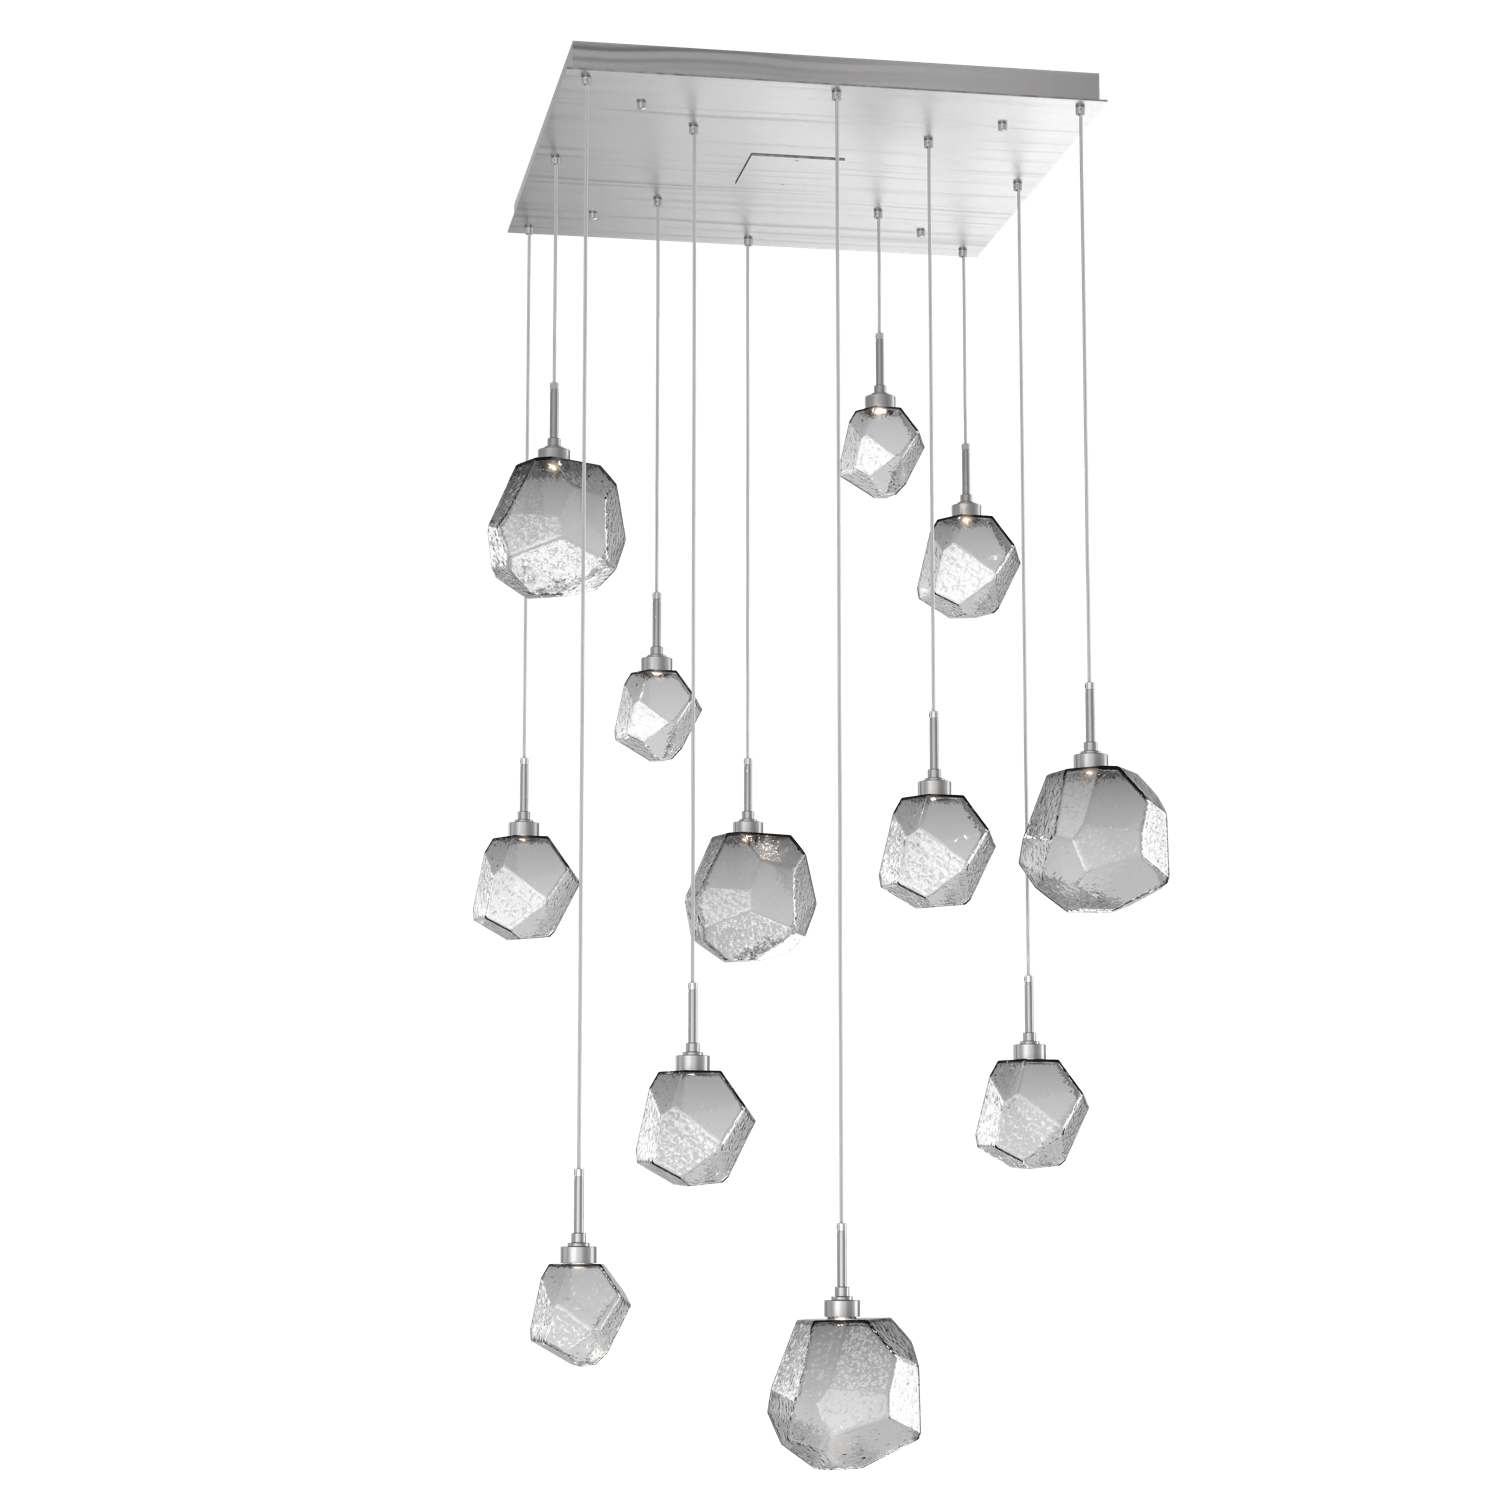 CHB0039-12-SN-S-Hammerton-Studio-Gem-12-light-square-pendant-chandelier-with-satin-nickel-finish-and-smoke-blown-glass-shades-and-LED-lamping